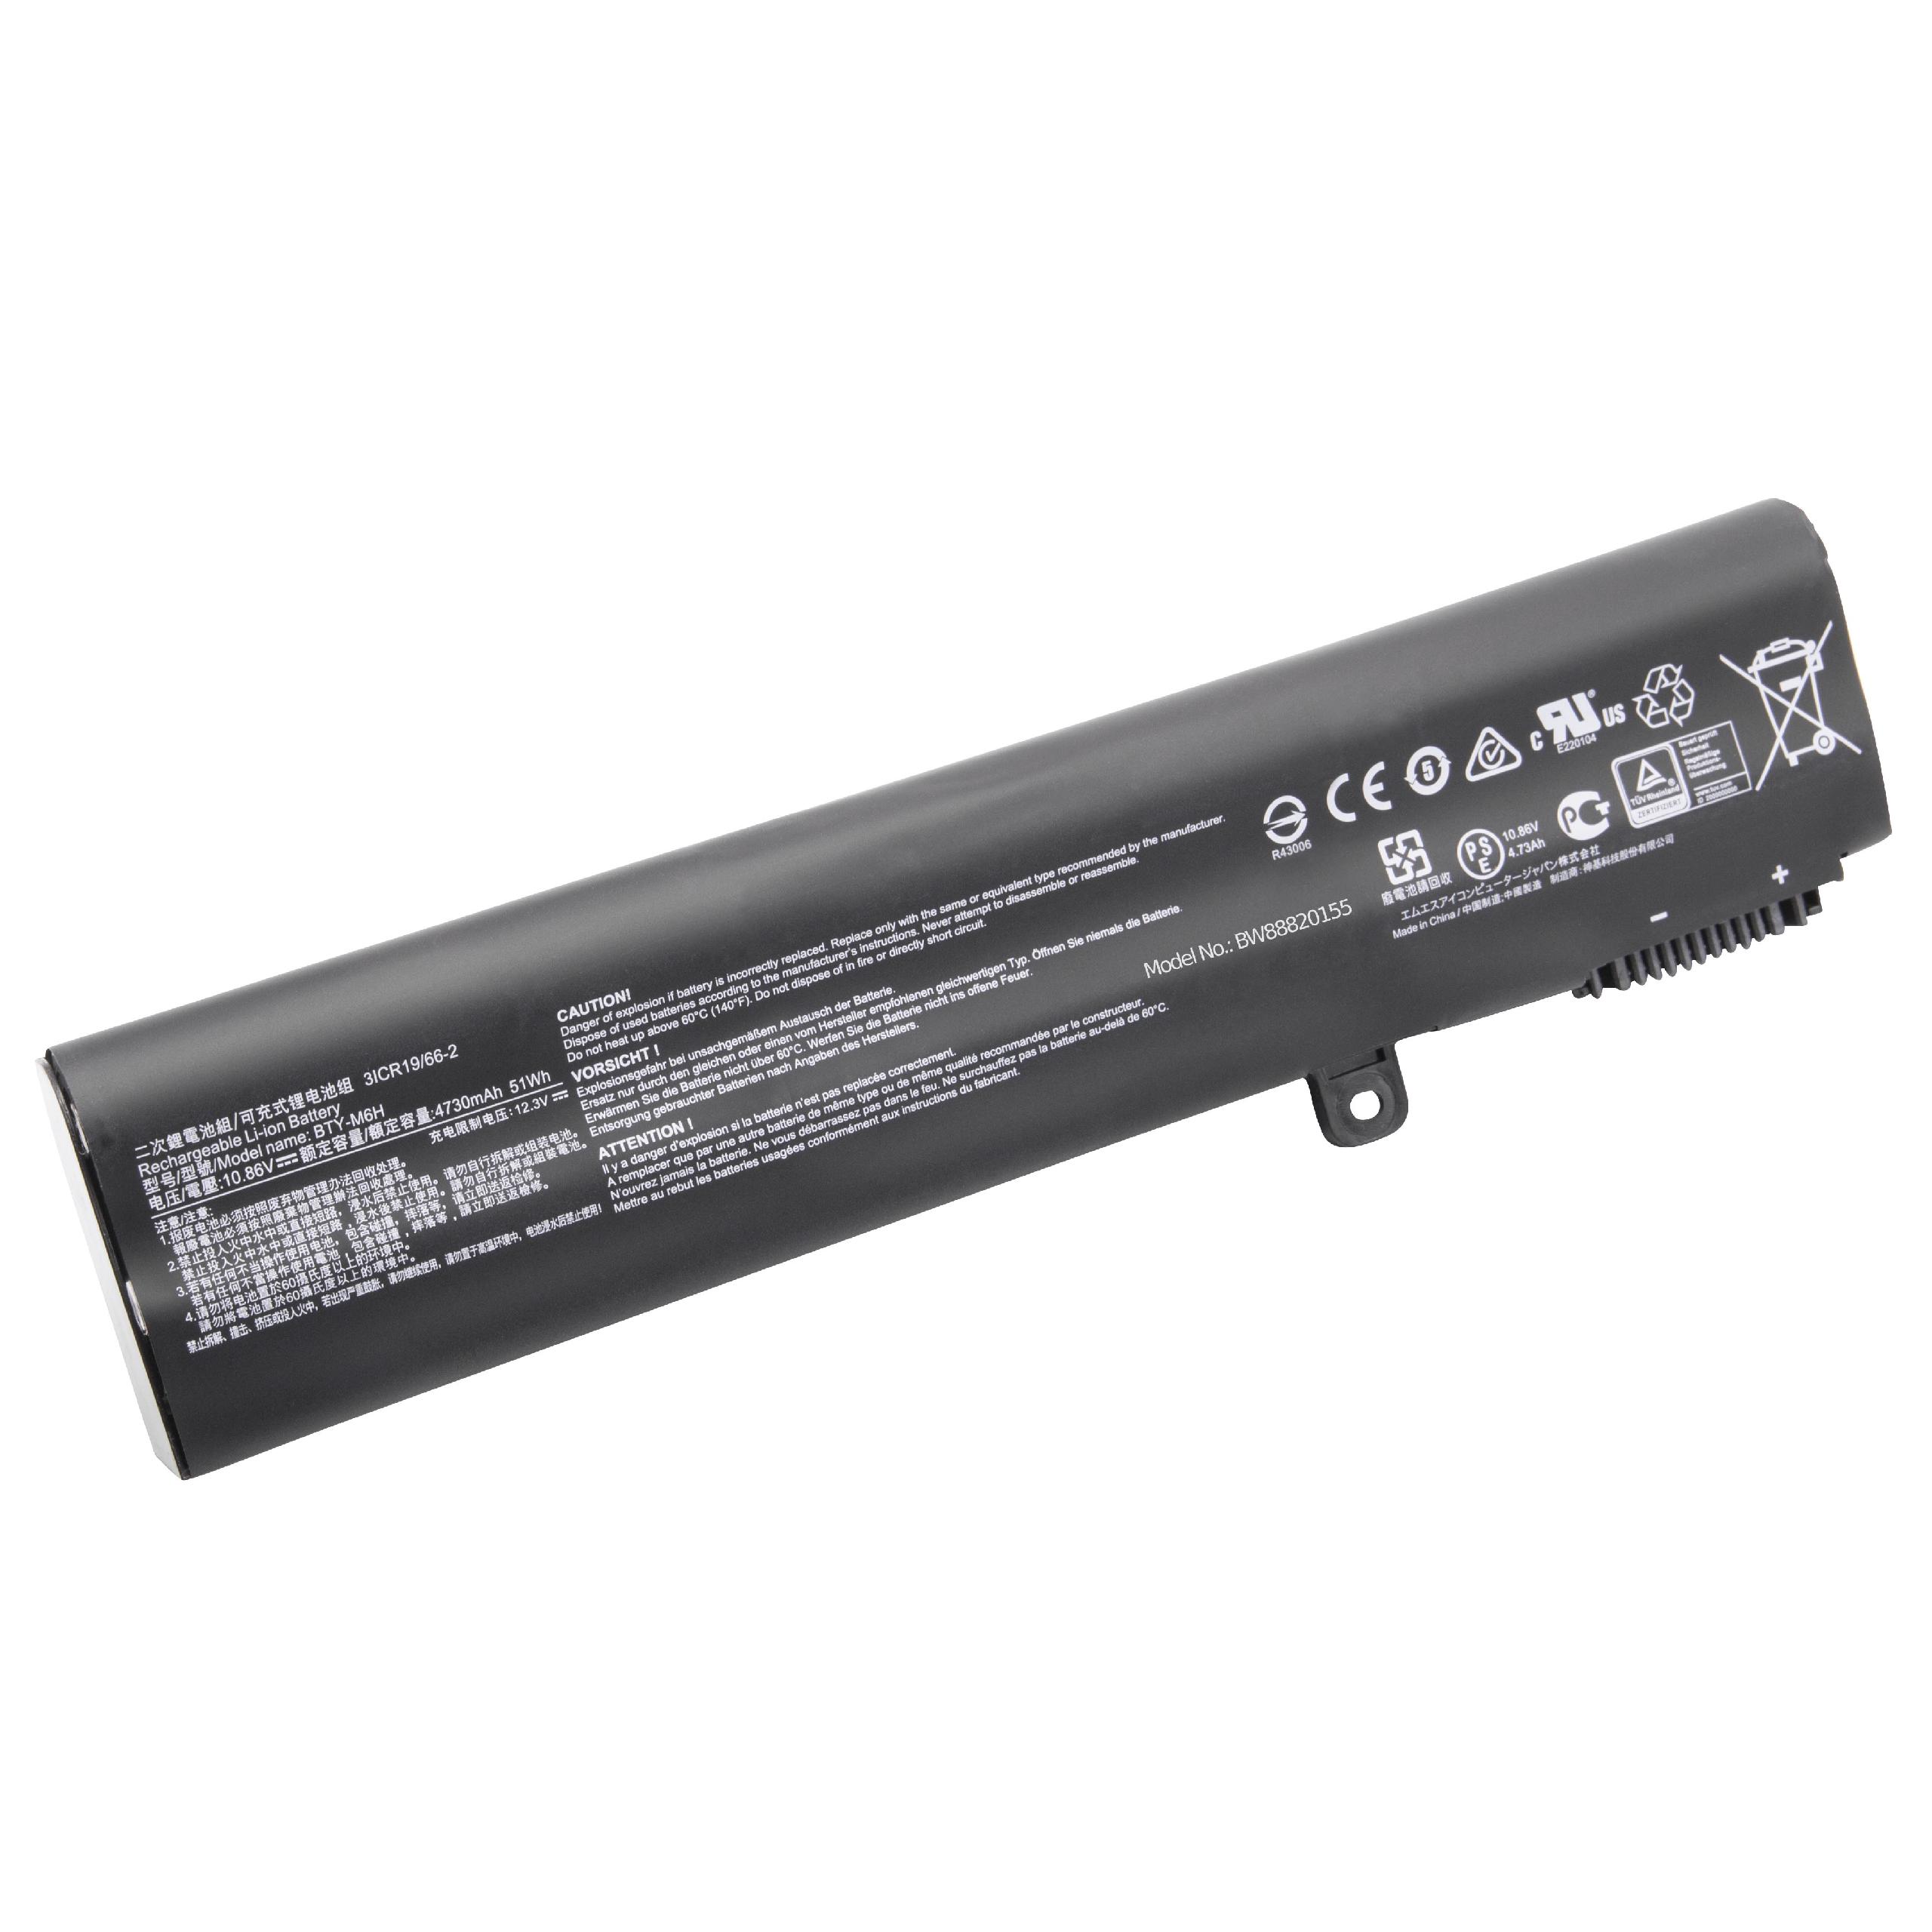 Notebook Battery Replacement for MSI 3ICR19/66-2, BTY-M6H, 3ICR19/65-2 - 4730mAh 10.86V Li-Ion, black